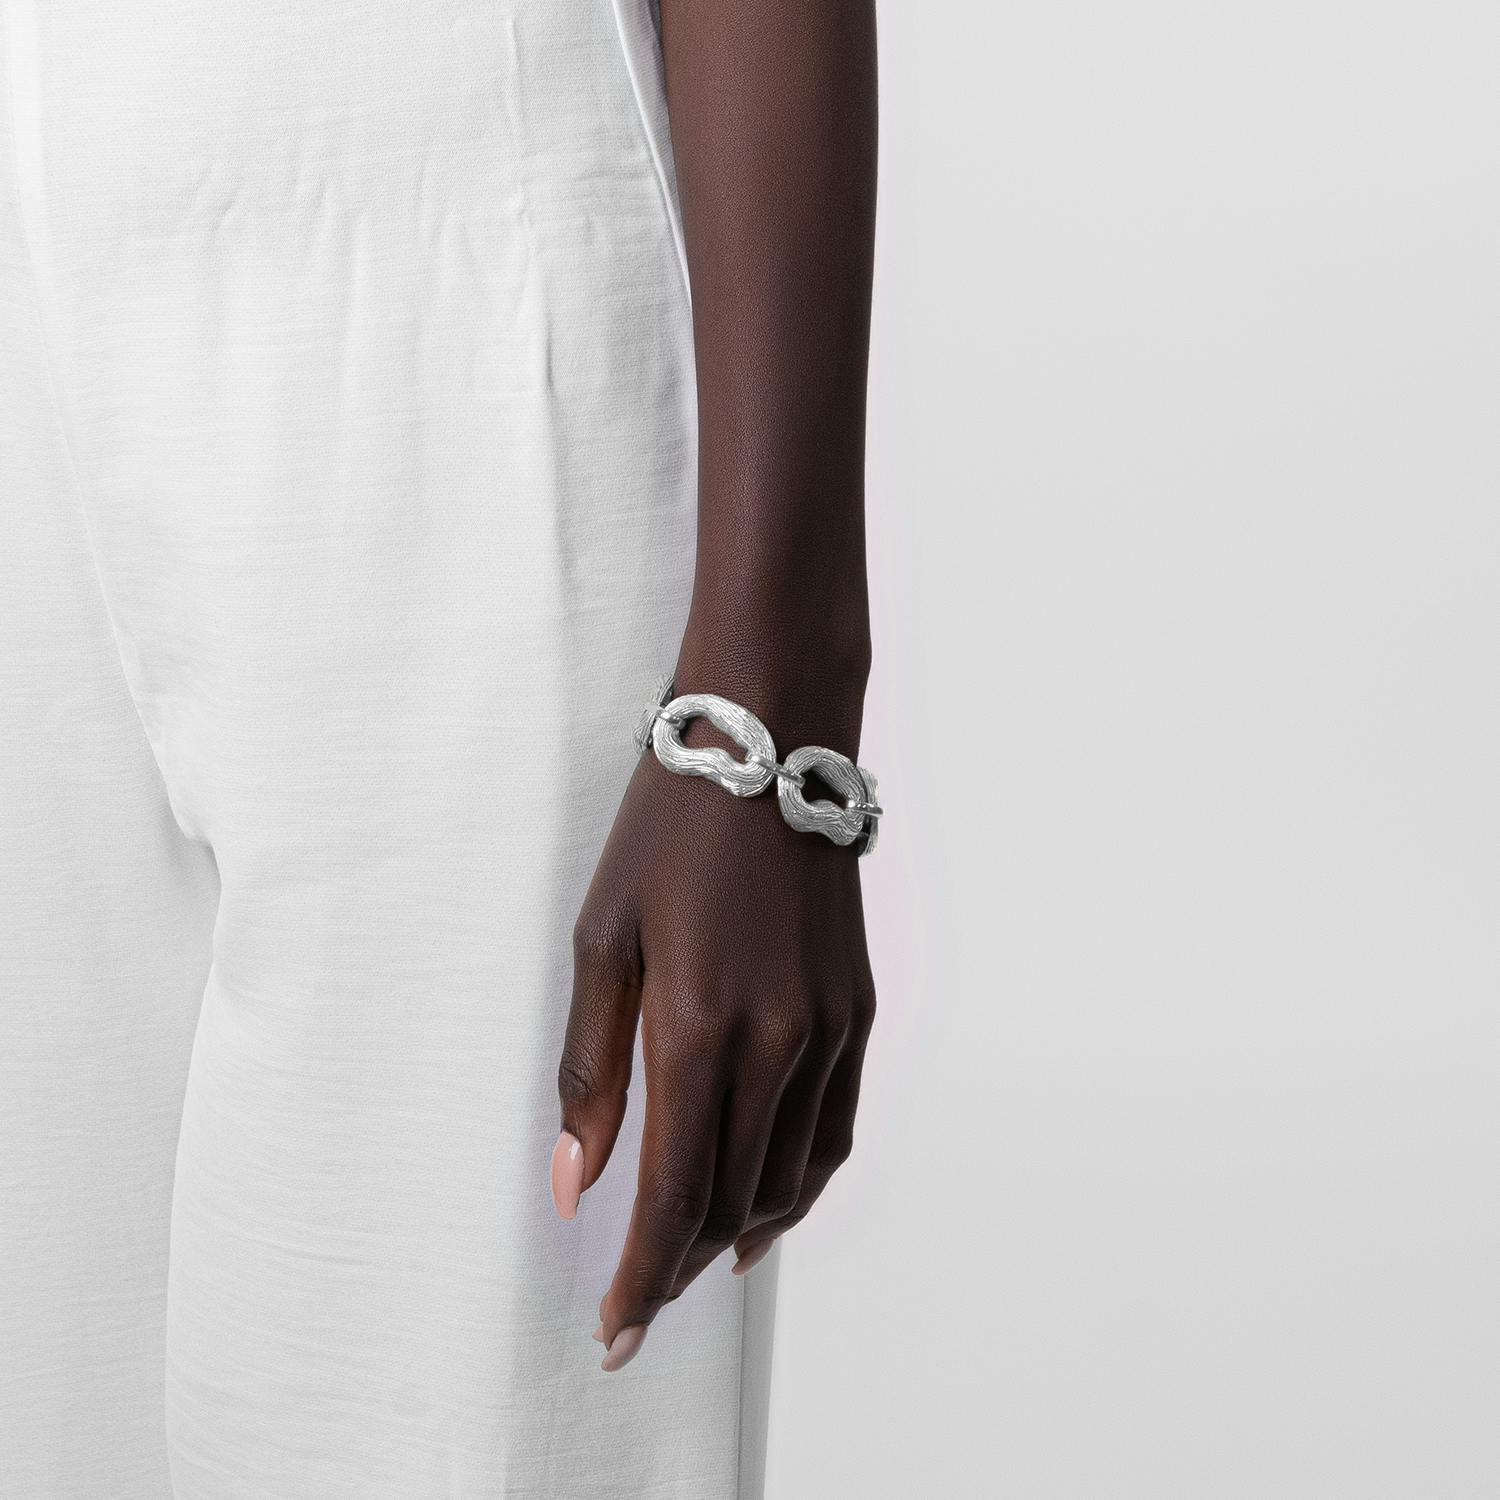 SYLVIE LINK BRACELET SILVER TONE , a product by Equiivalence